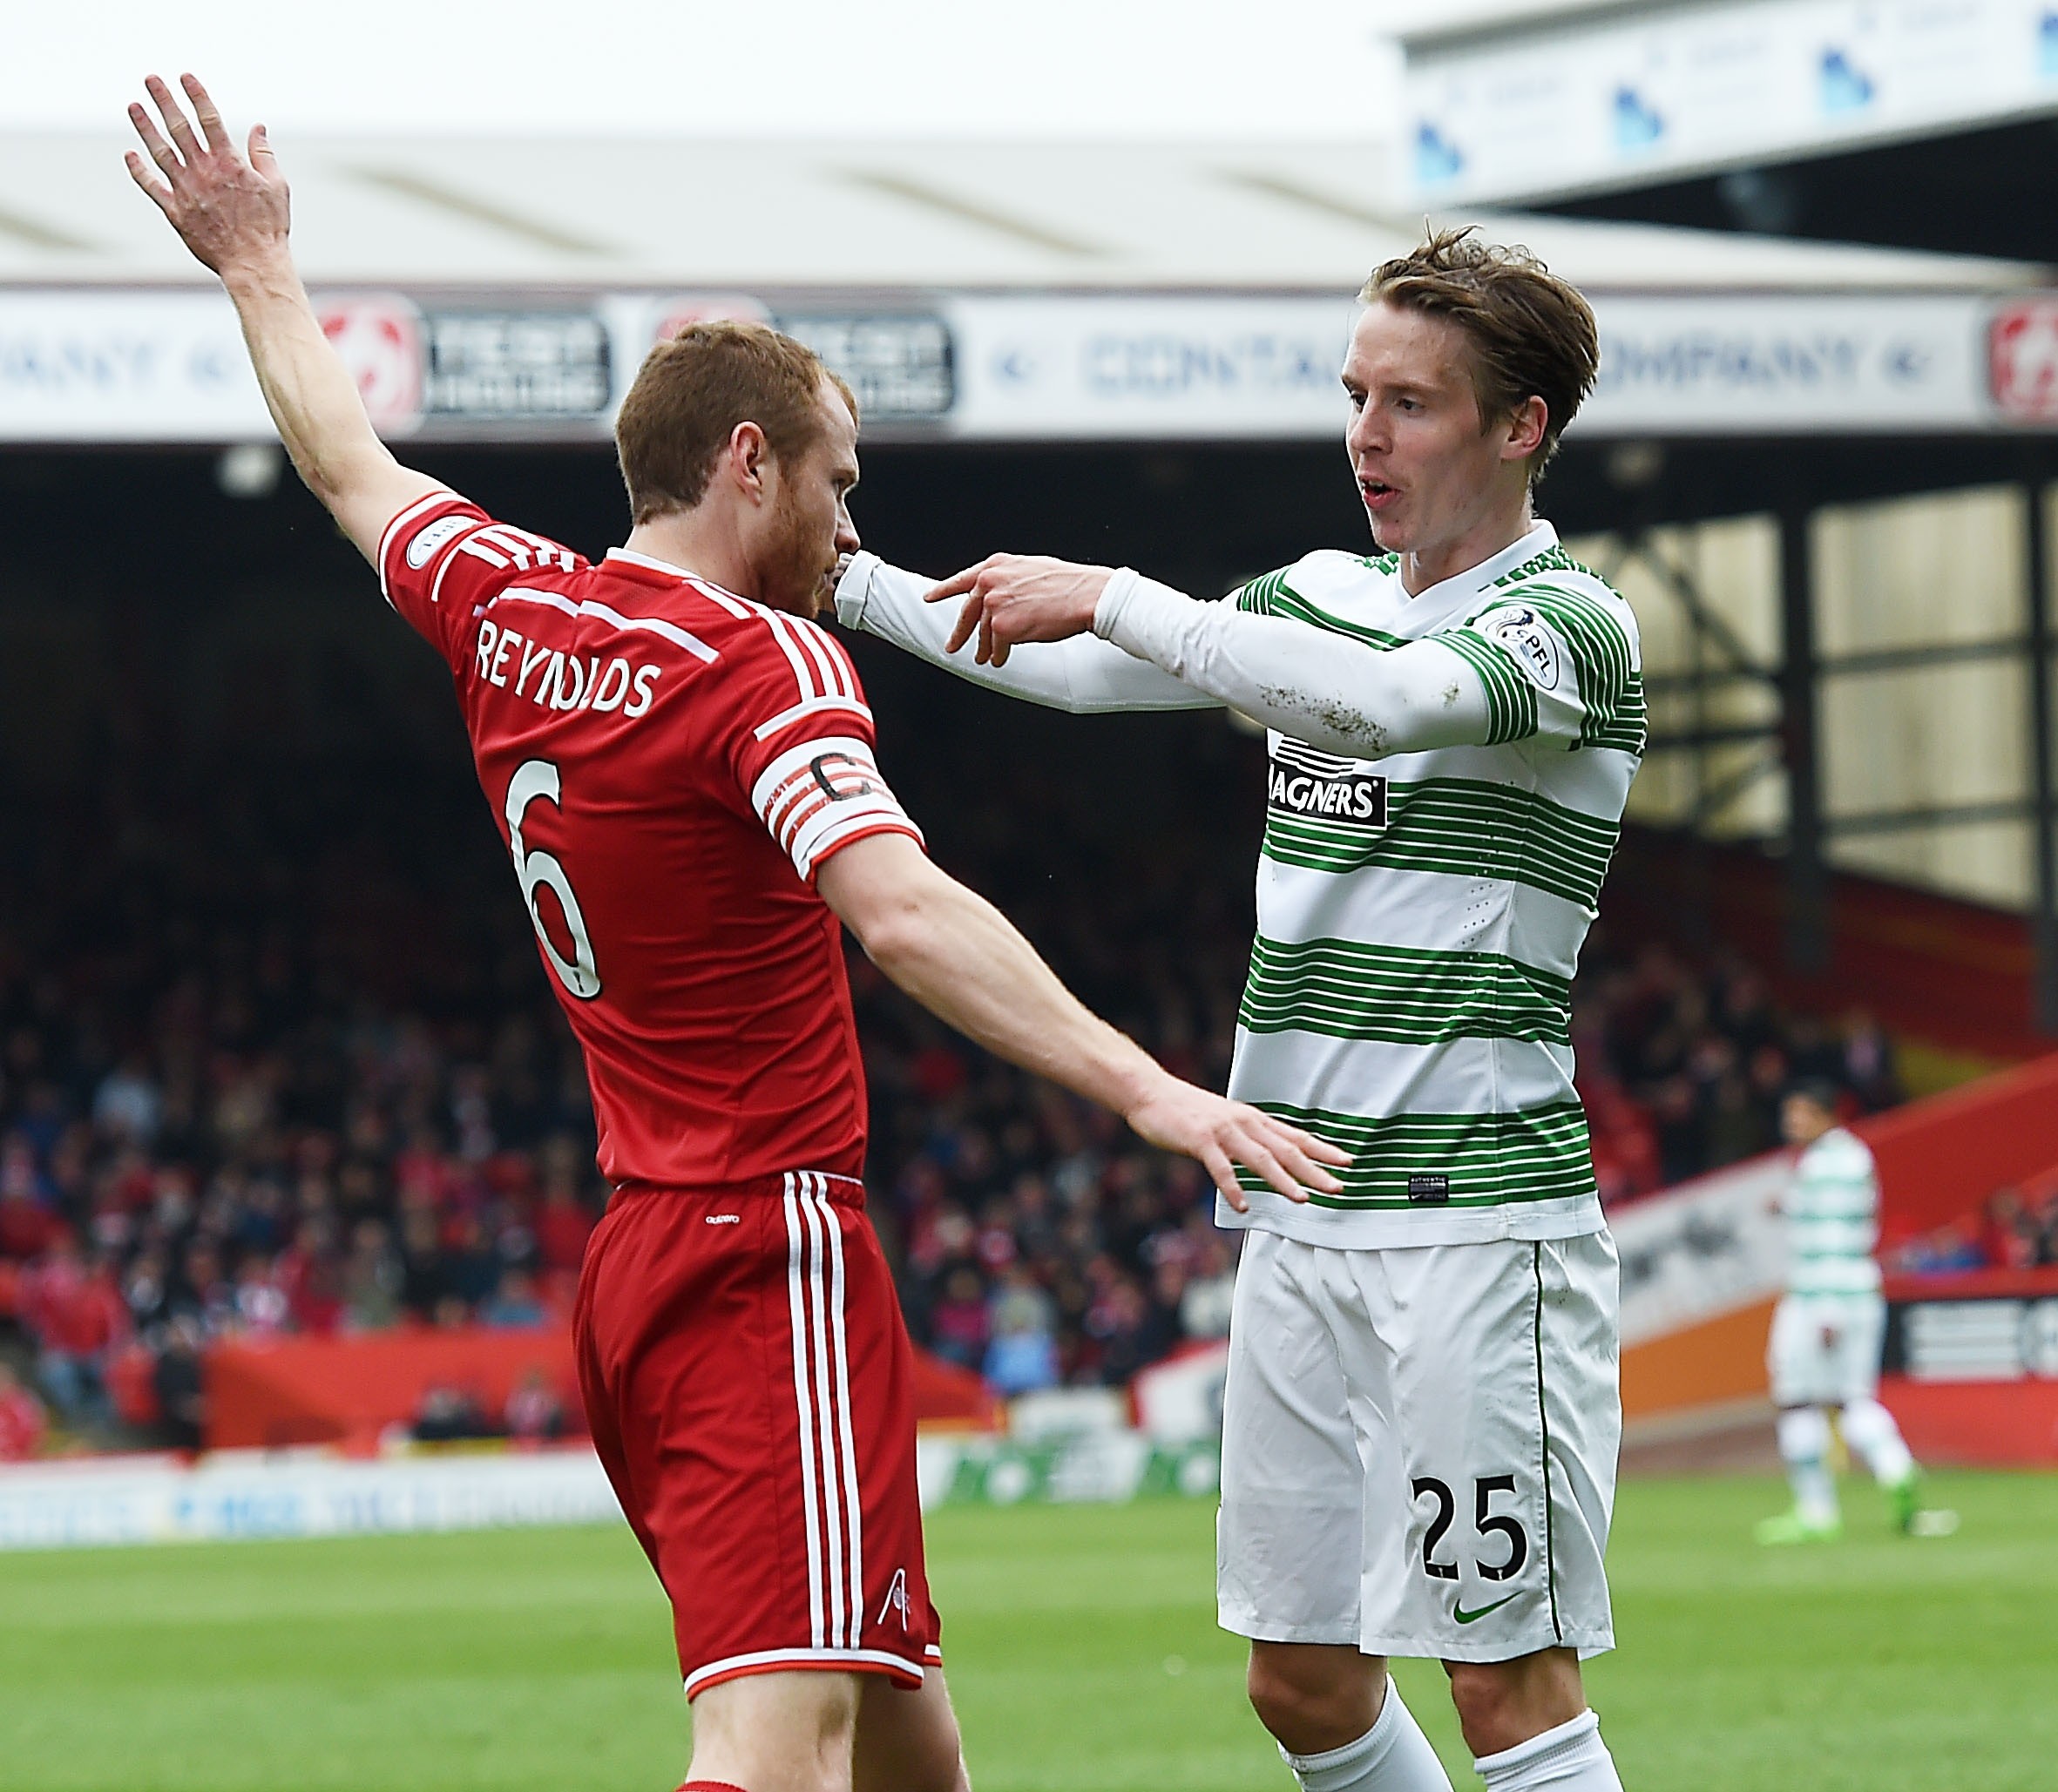 Nobody told Reynolds and Johansen there was "nothing to play for" this afternoon